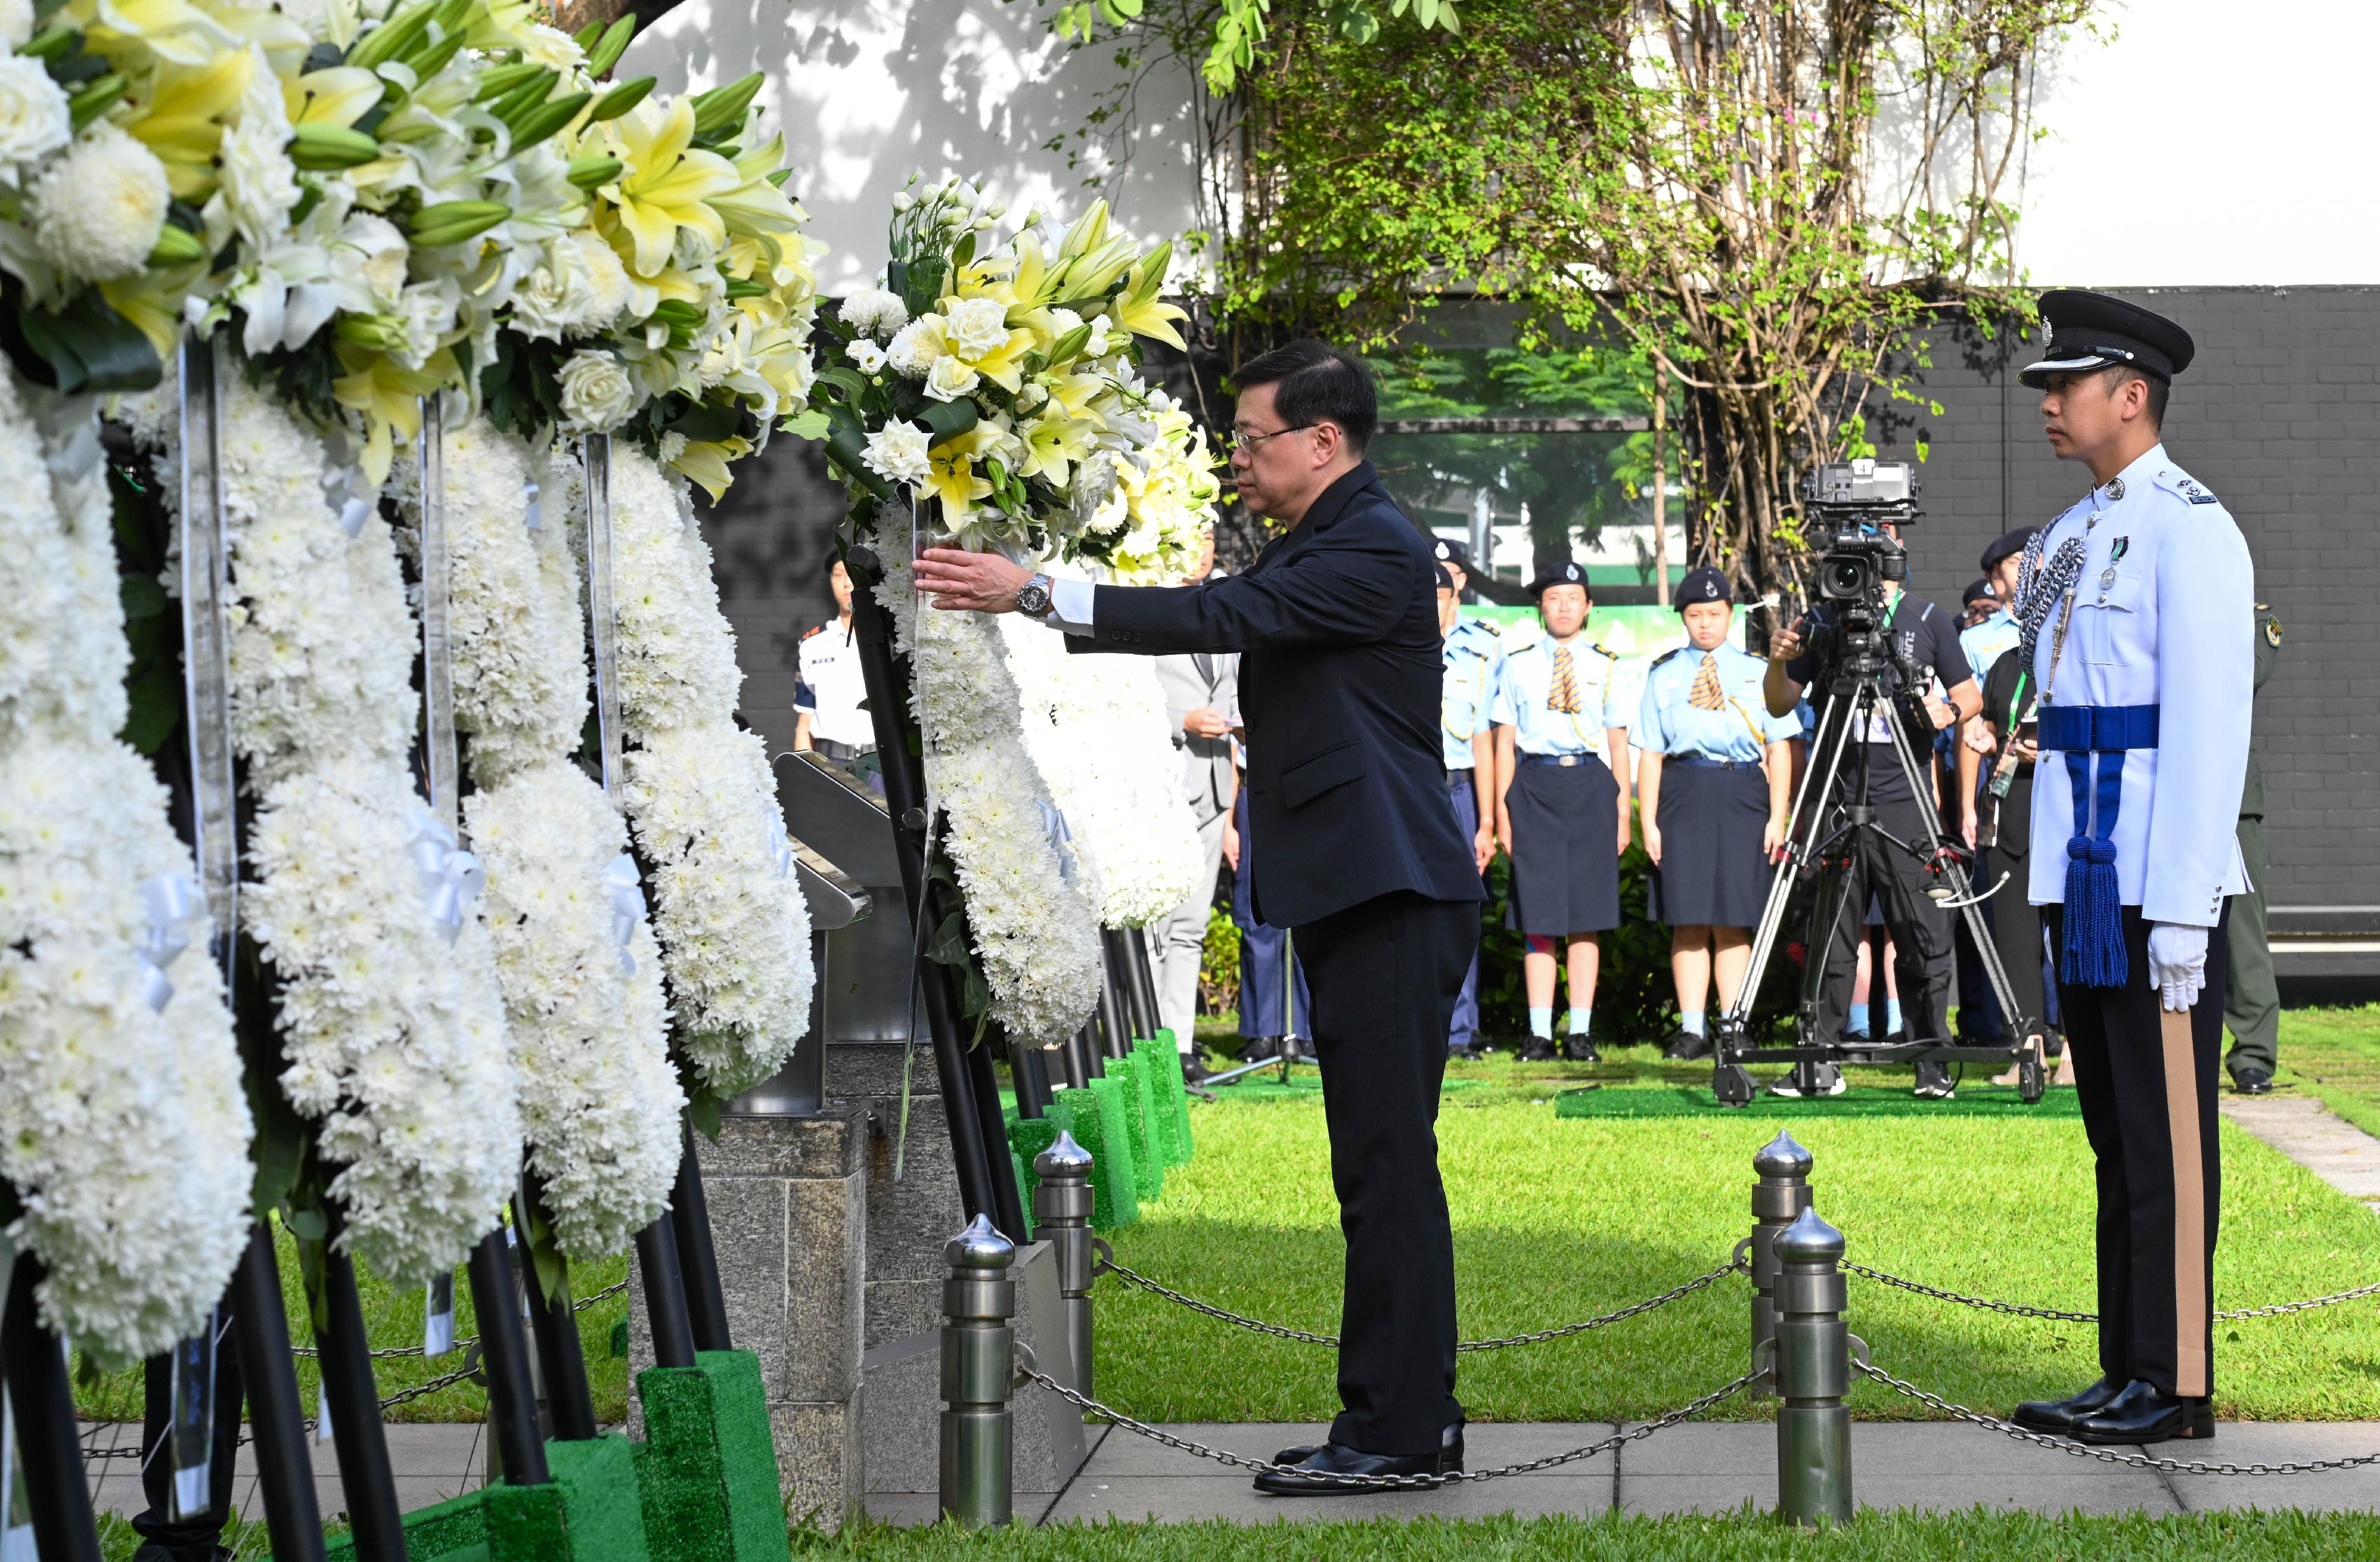 The Chief Executive, Mr John Lee, attends a ceremony to commemorate the victory day of the Chinese People's War of Resistance Against Japanese Aggression at Hong Kong City Hall Memorial Garden this morning (September 3).